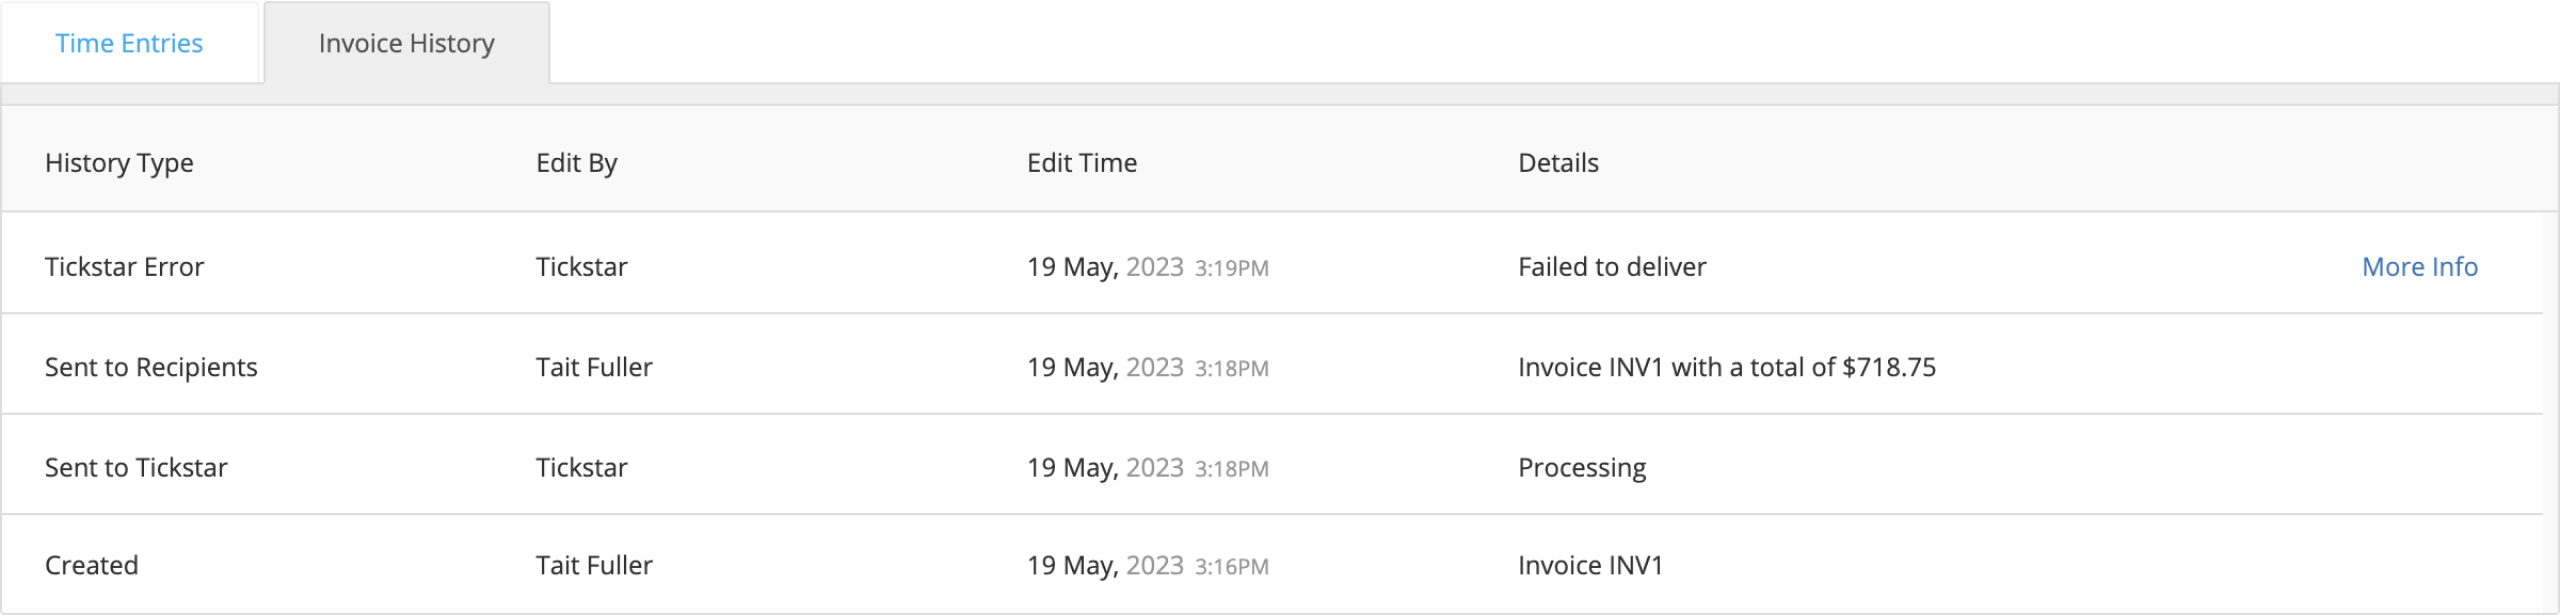 Invoice_History_-_Failure.png